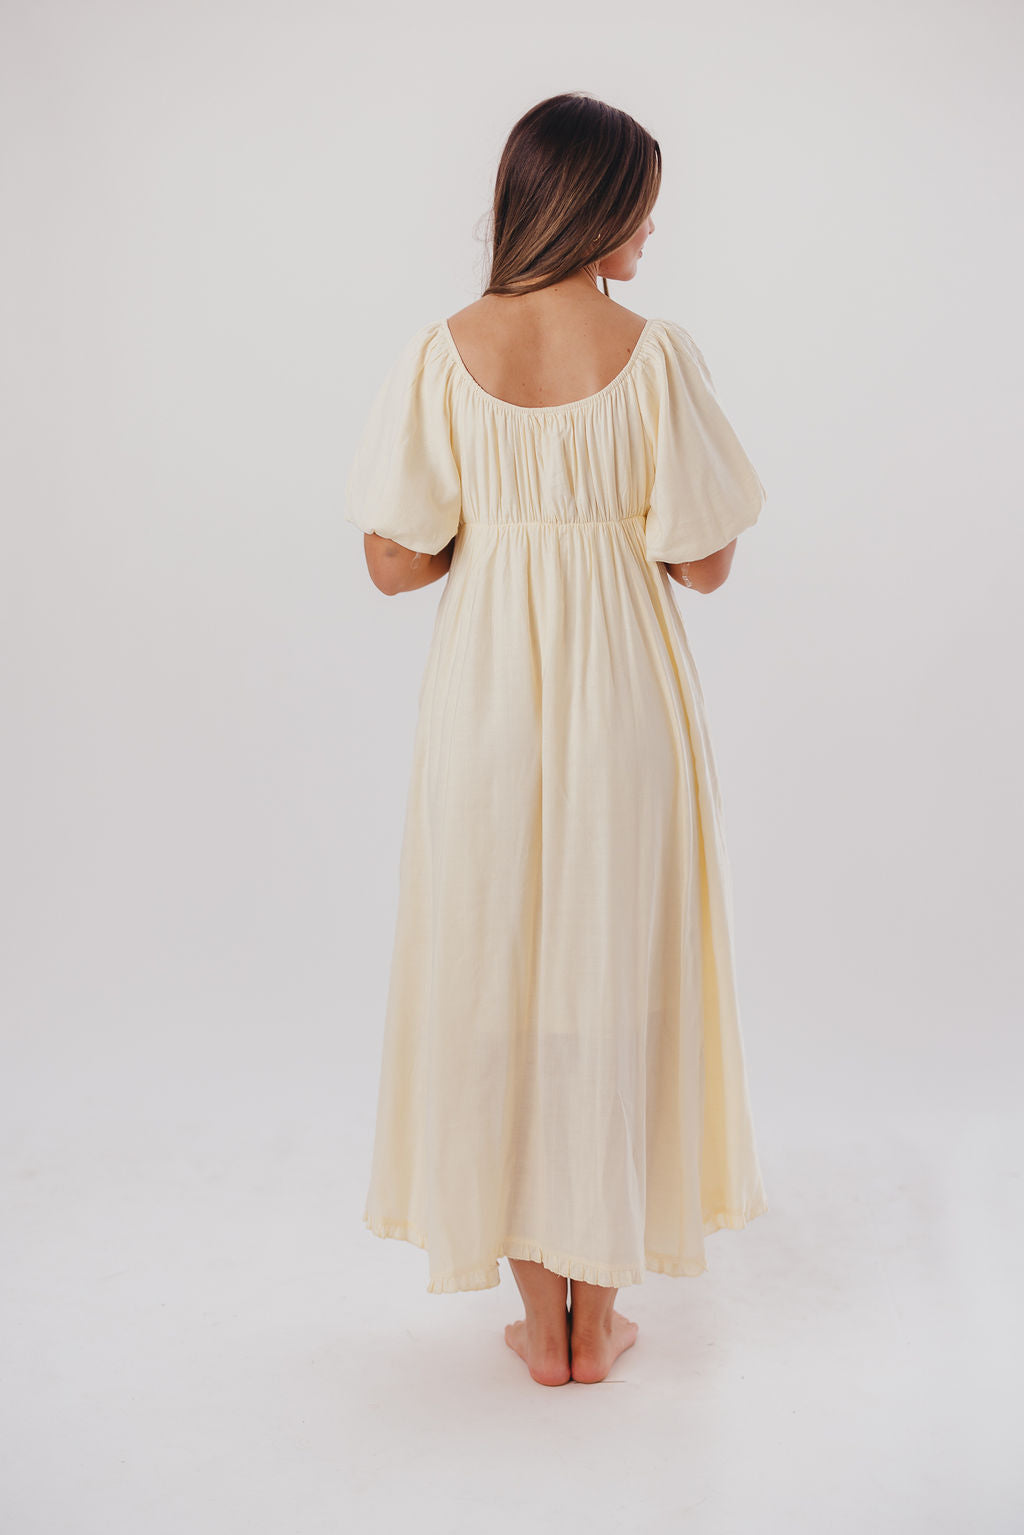 Chesley Puffed Sleeve Maxi Dress with Front Tie Detail in Natural